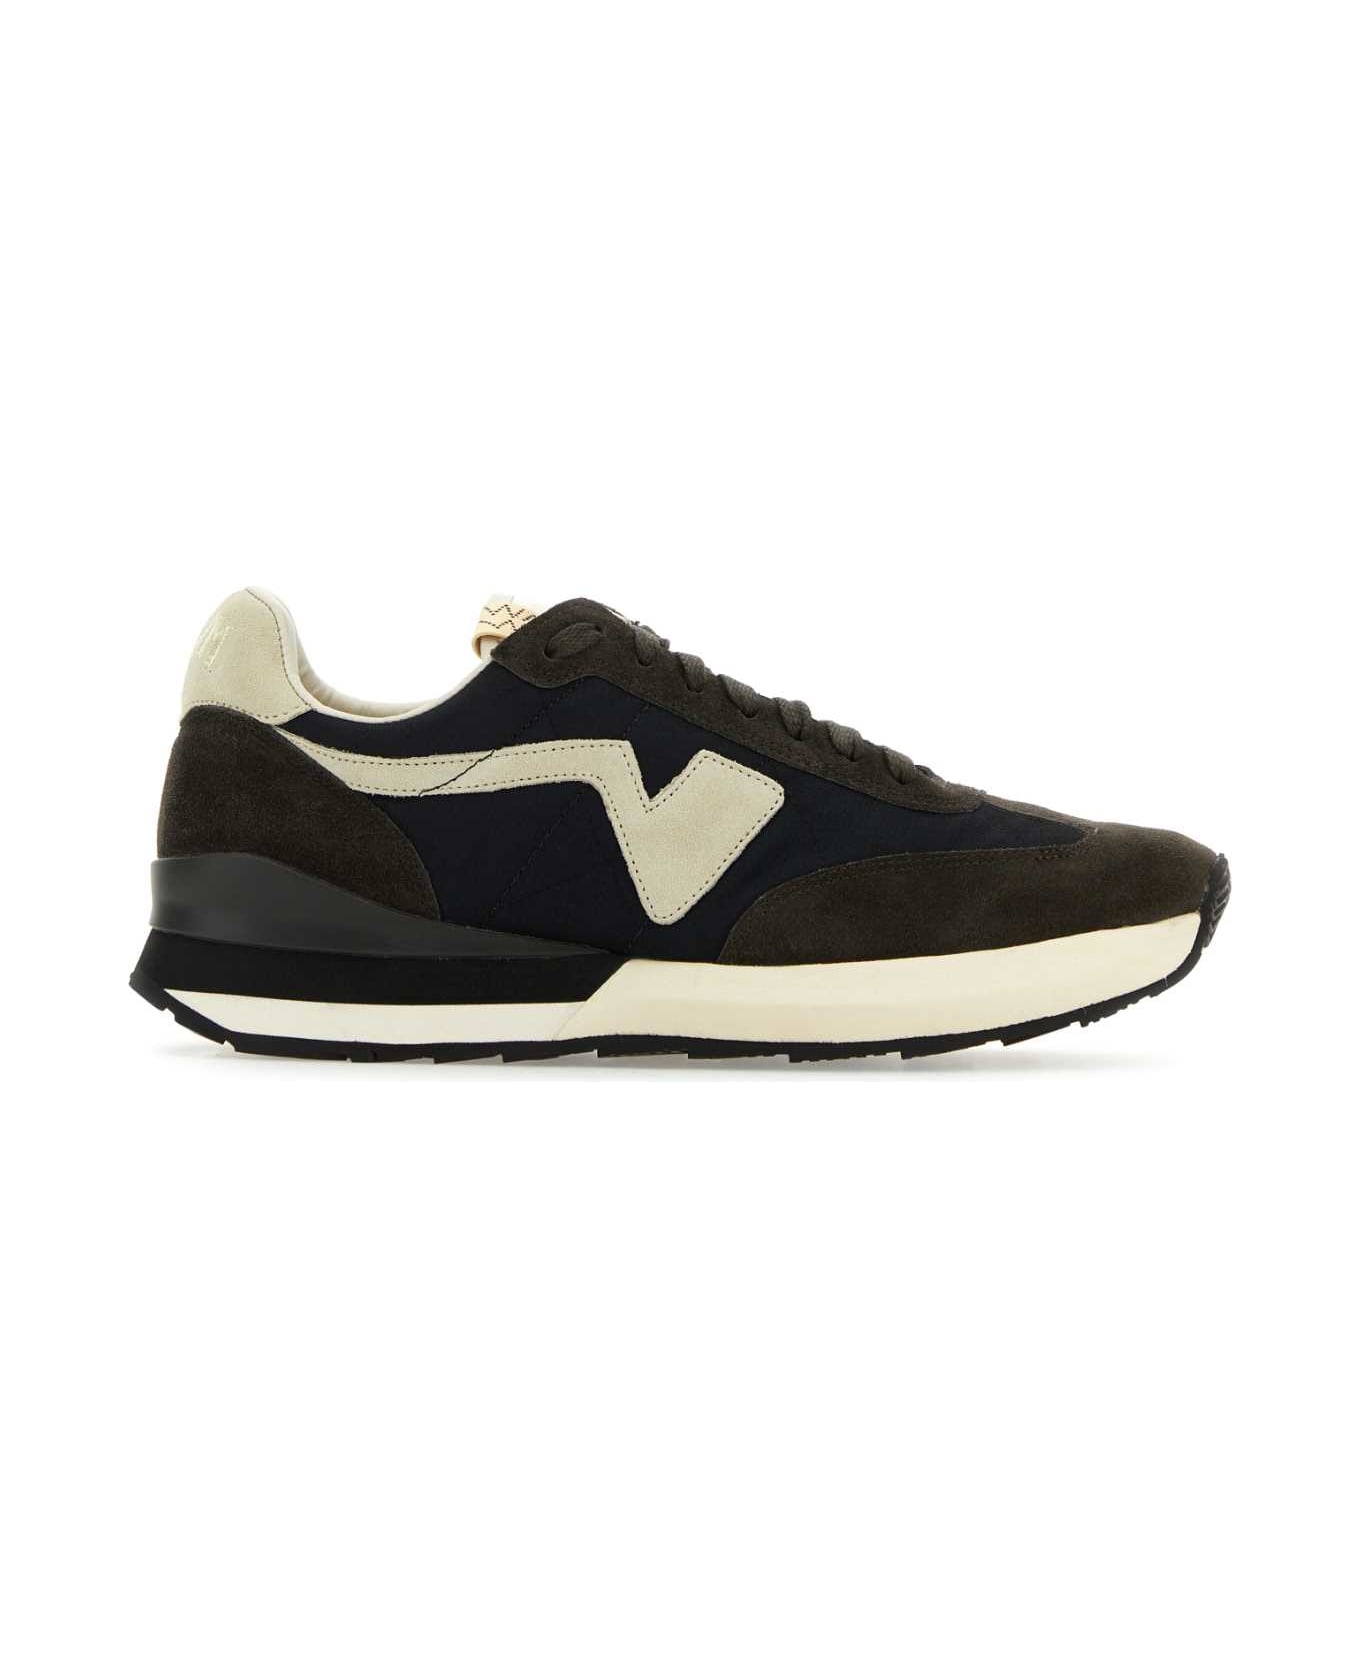 Visvim Multicolor Fabric And Suede Dunand Trainer Sneakers - BLACK